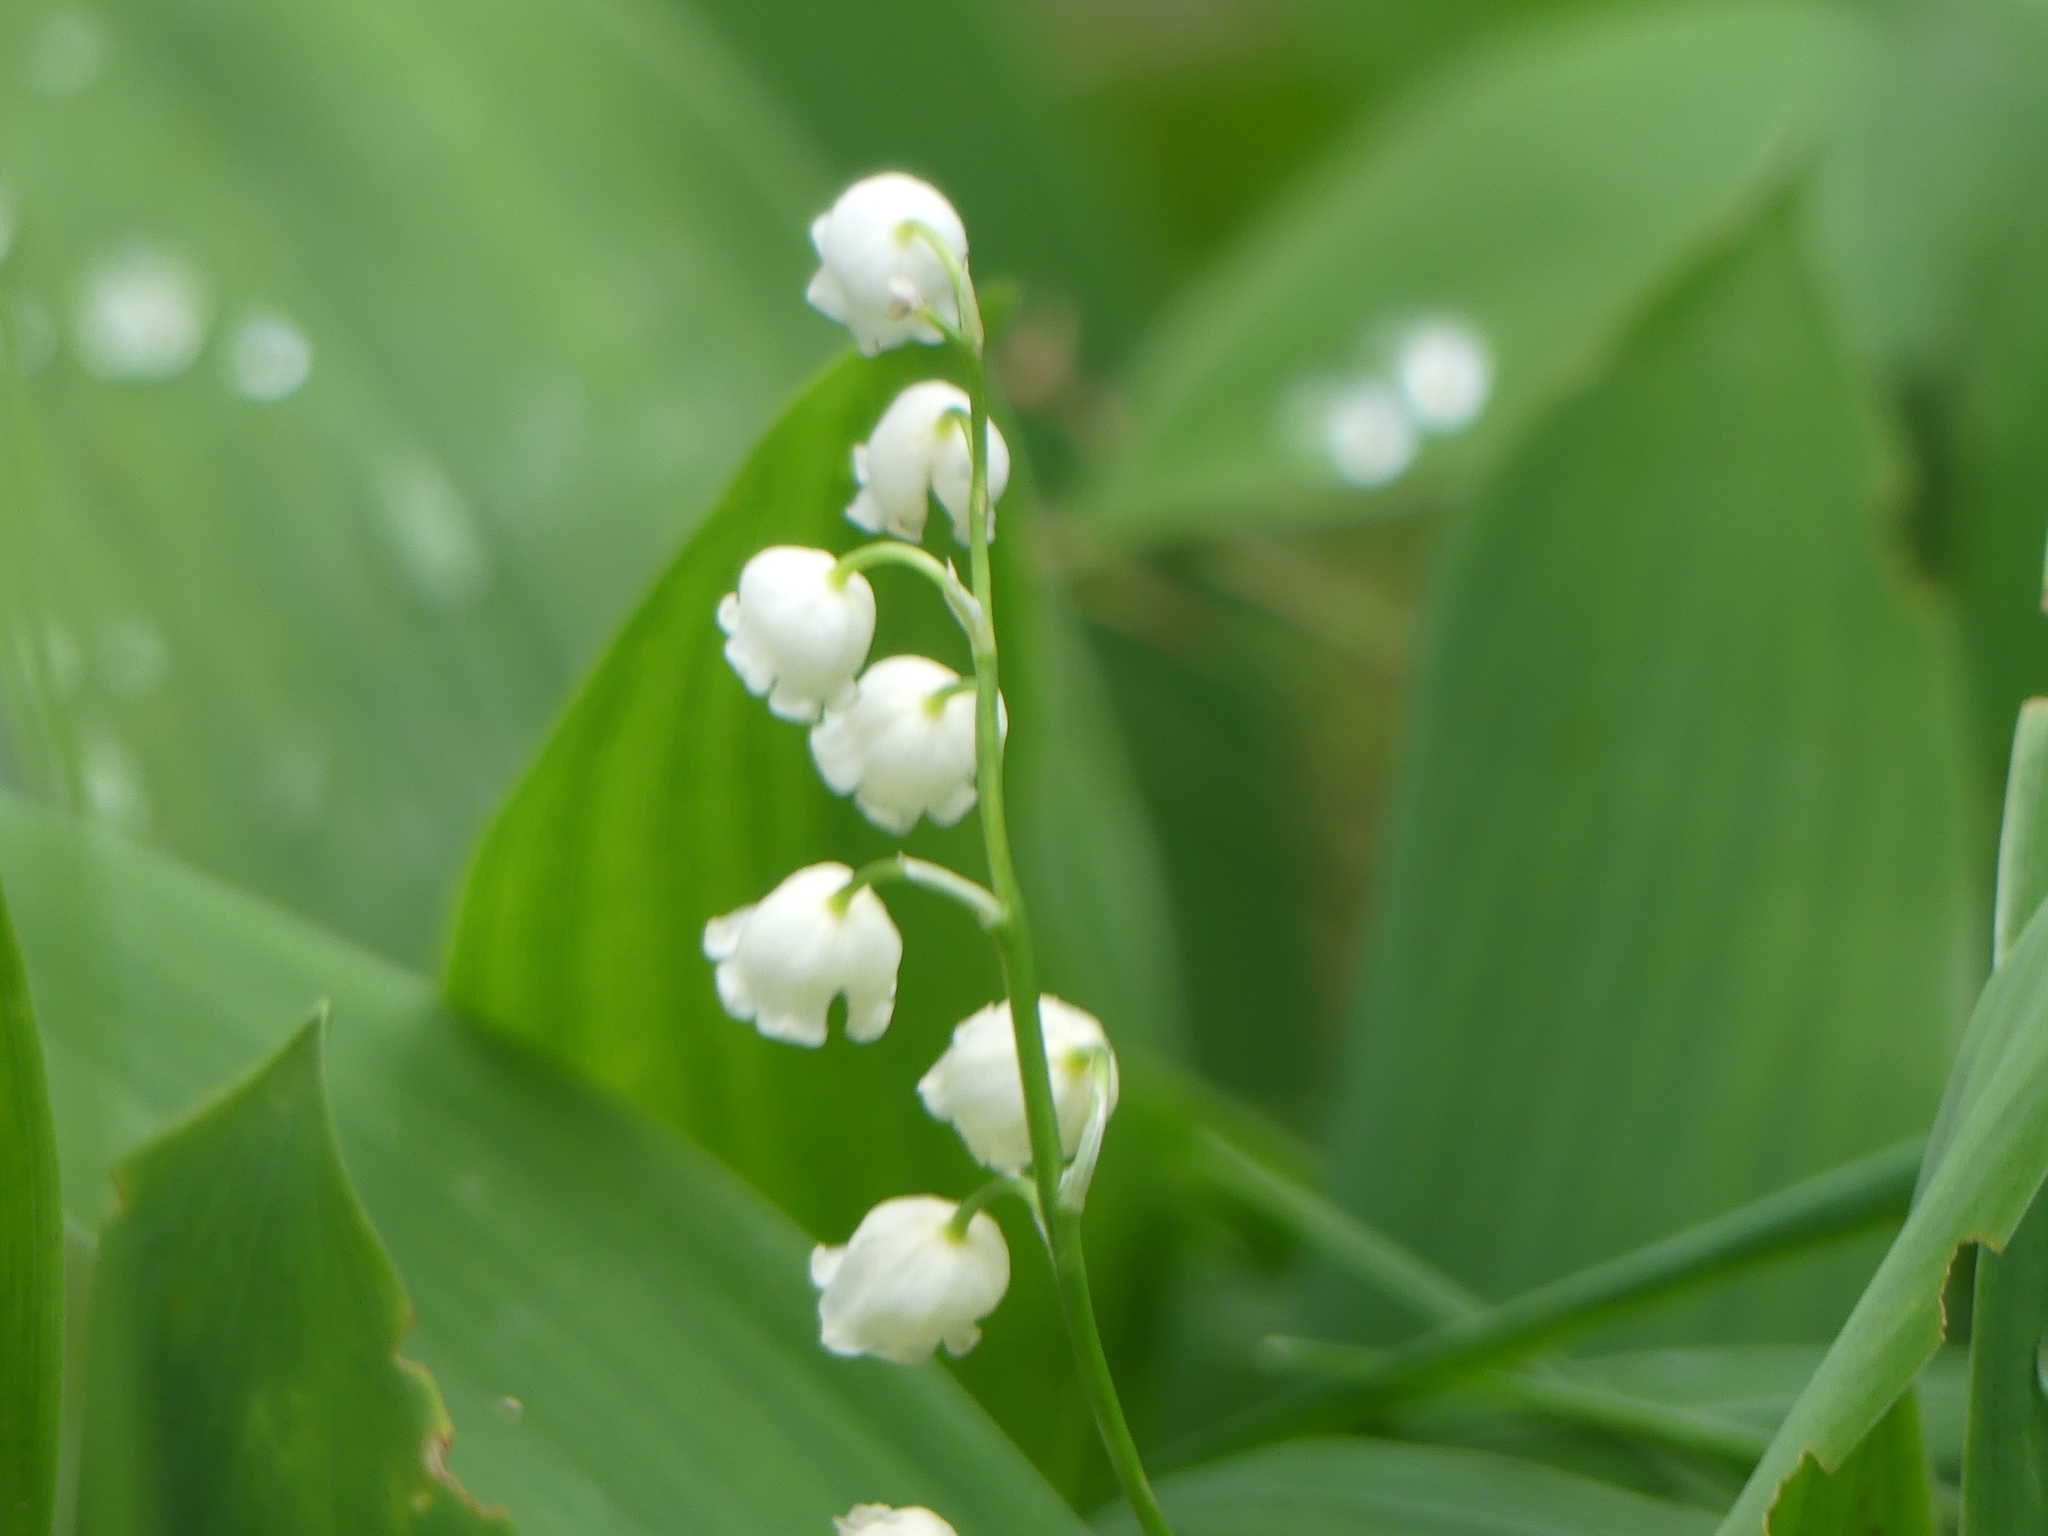 European lily of the valley : Convallaria majalis - Liliaceae (Lily)